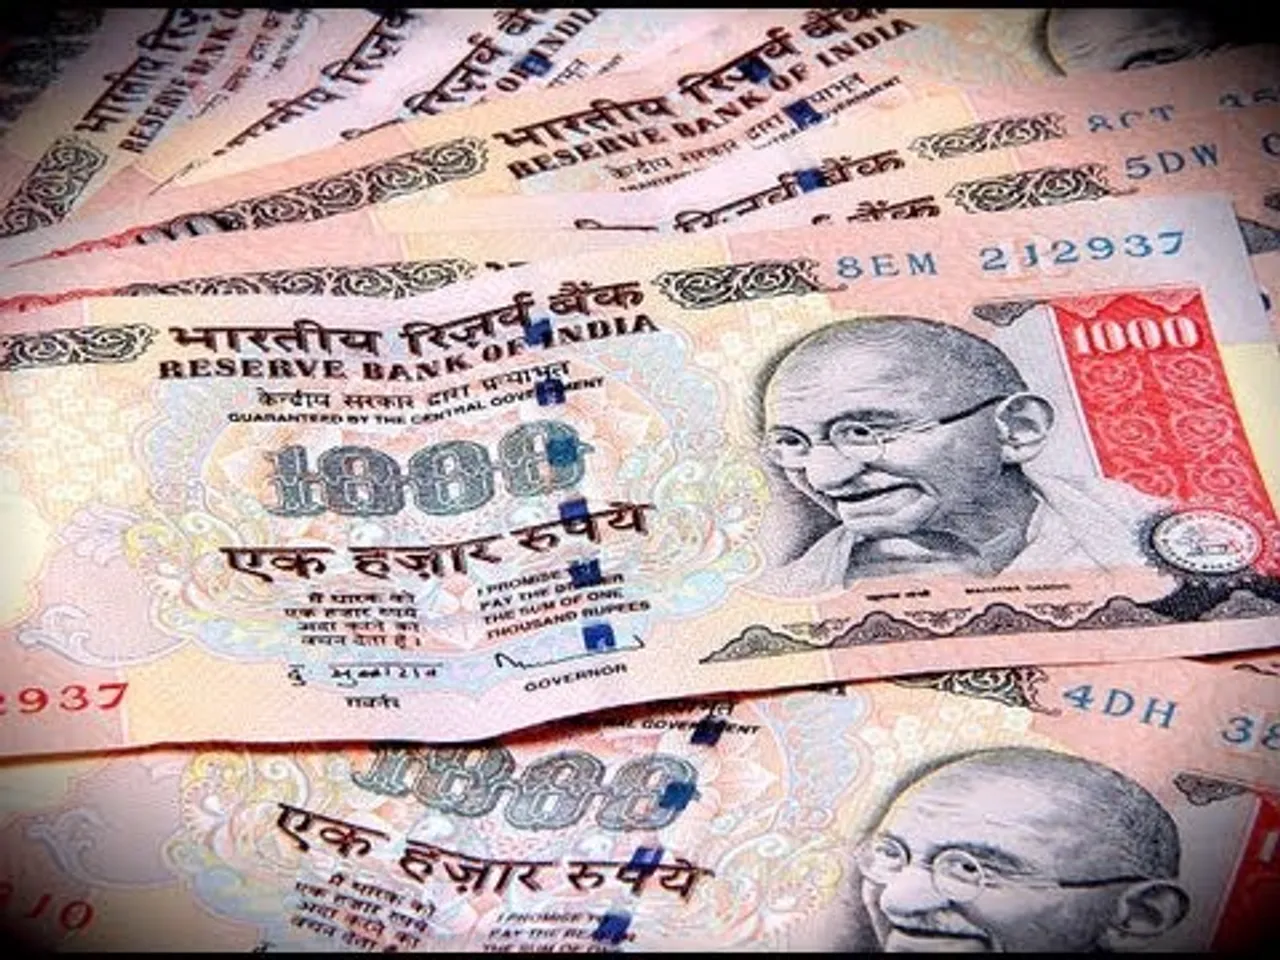 India wants Rs. 1,000 banknote